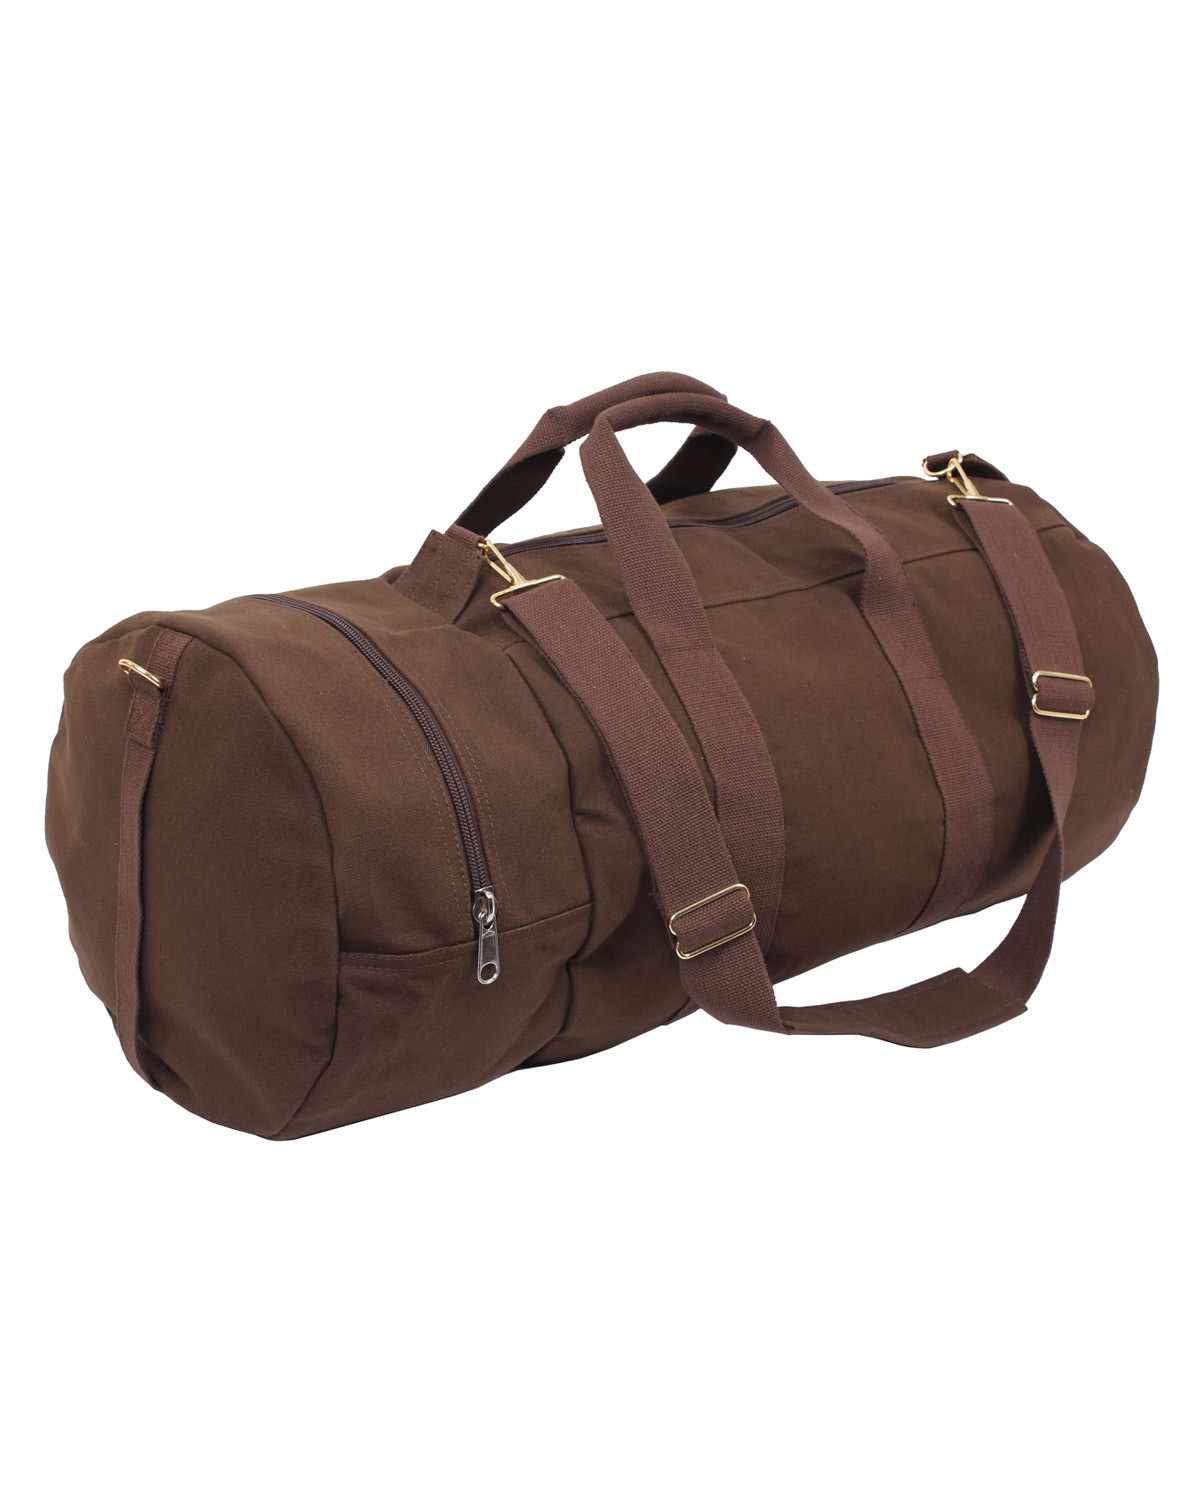 Rothco Canvas Sports Taske (Earth Brown, One Size)